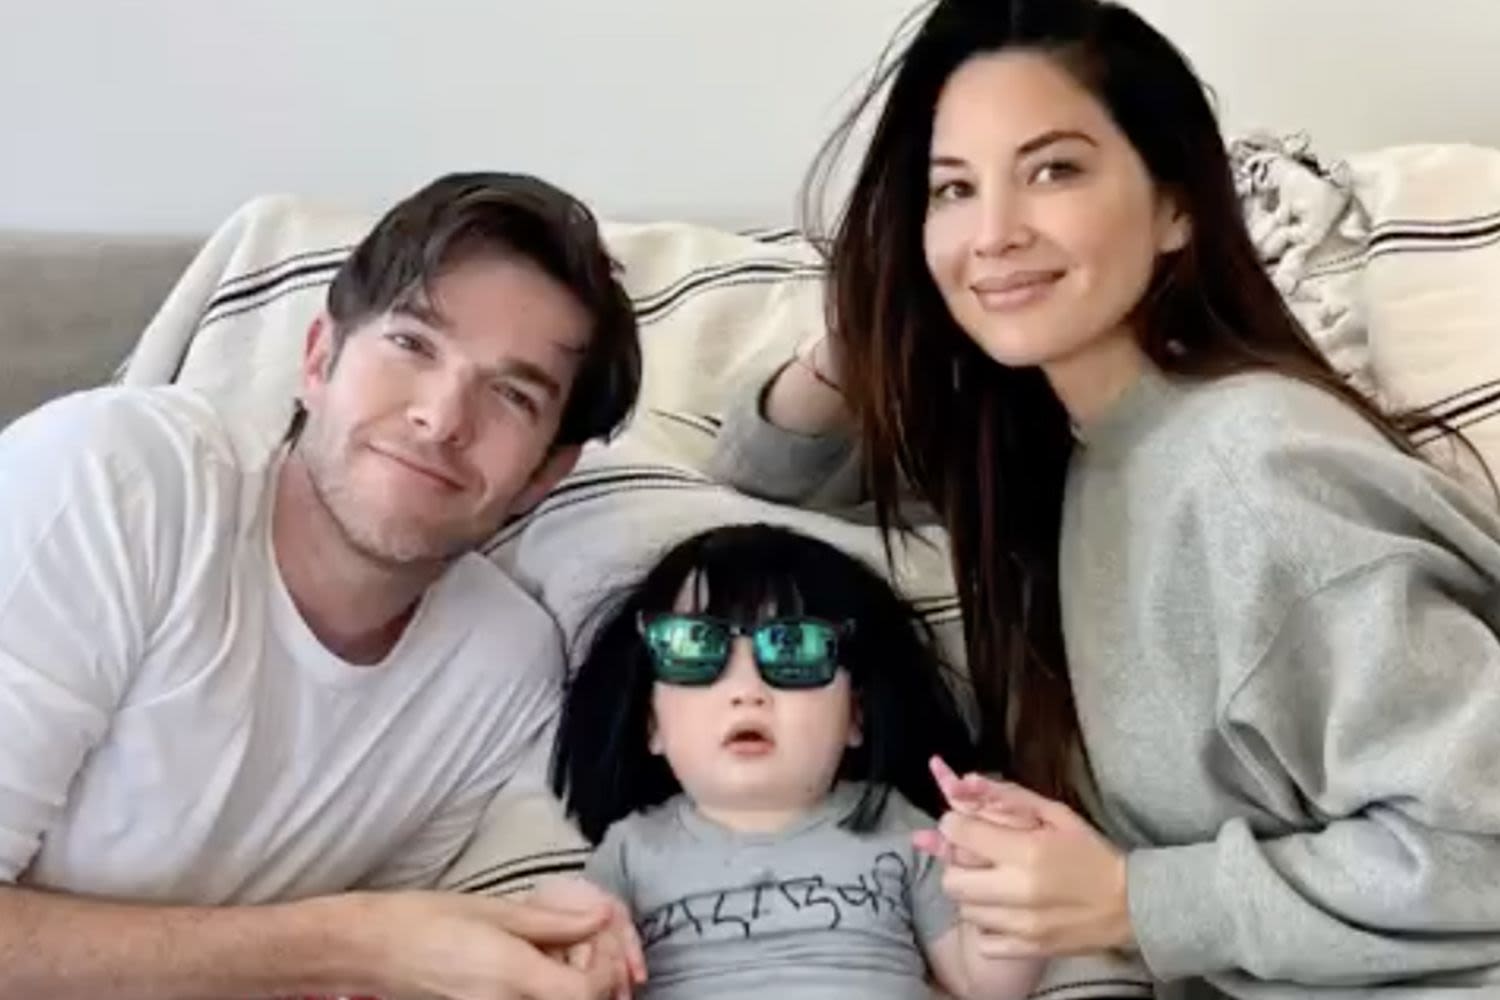 Olivia Munn and John Mulaney’s Son Malcolm Hiệp Wishes Her a ‘Happy Birthday’ in Adorable Video